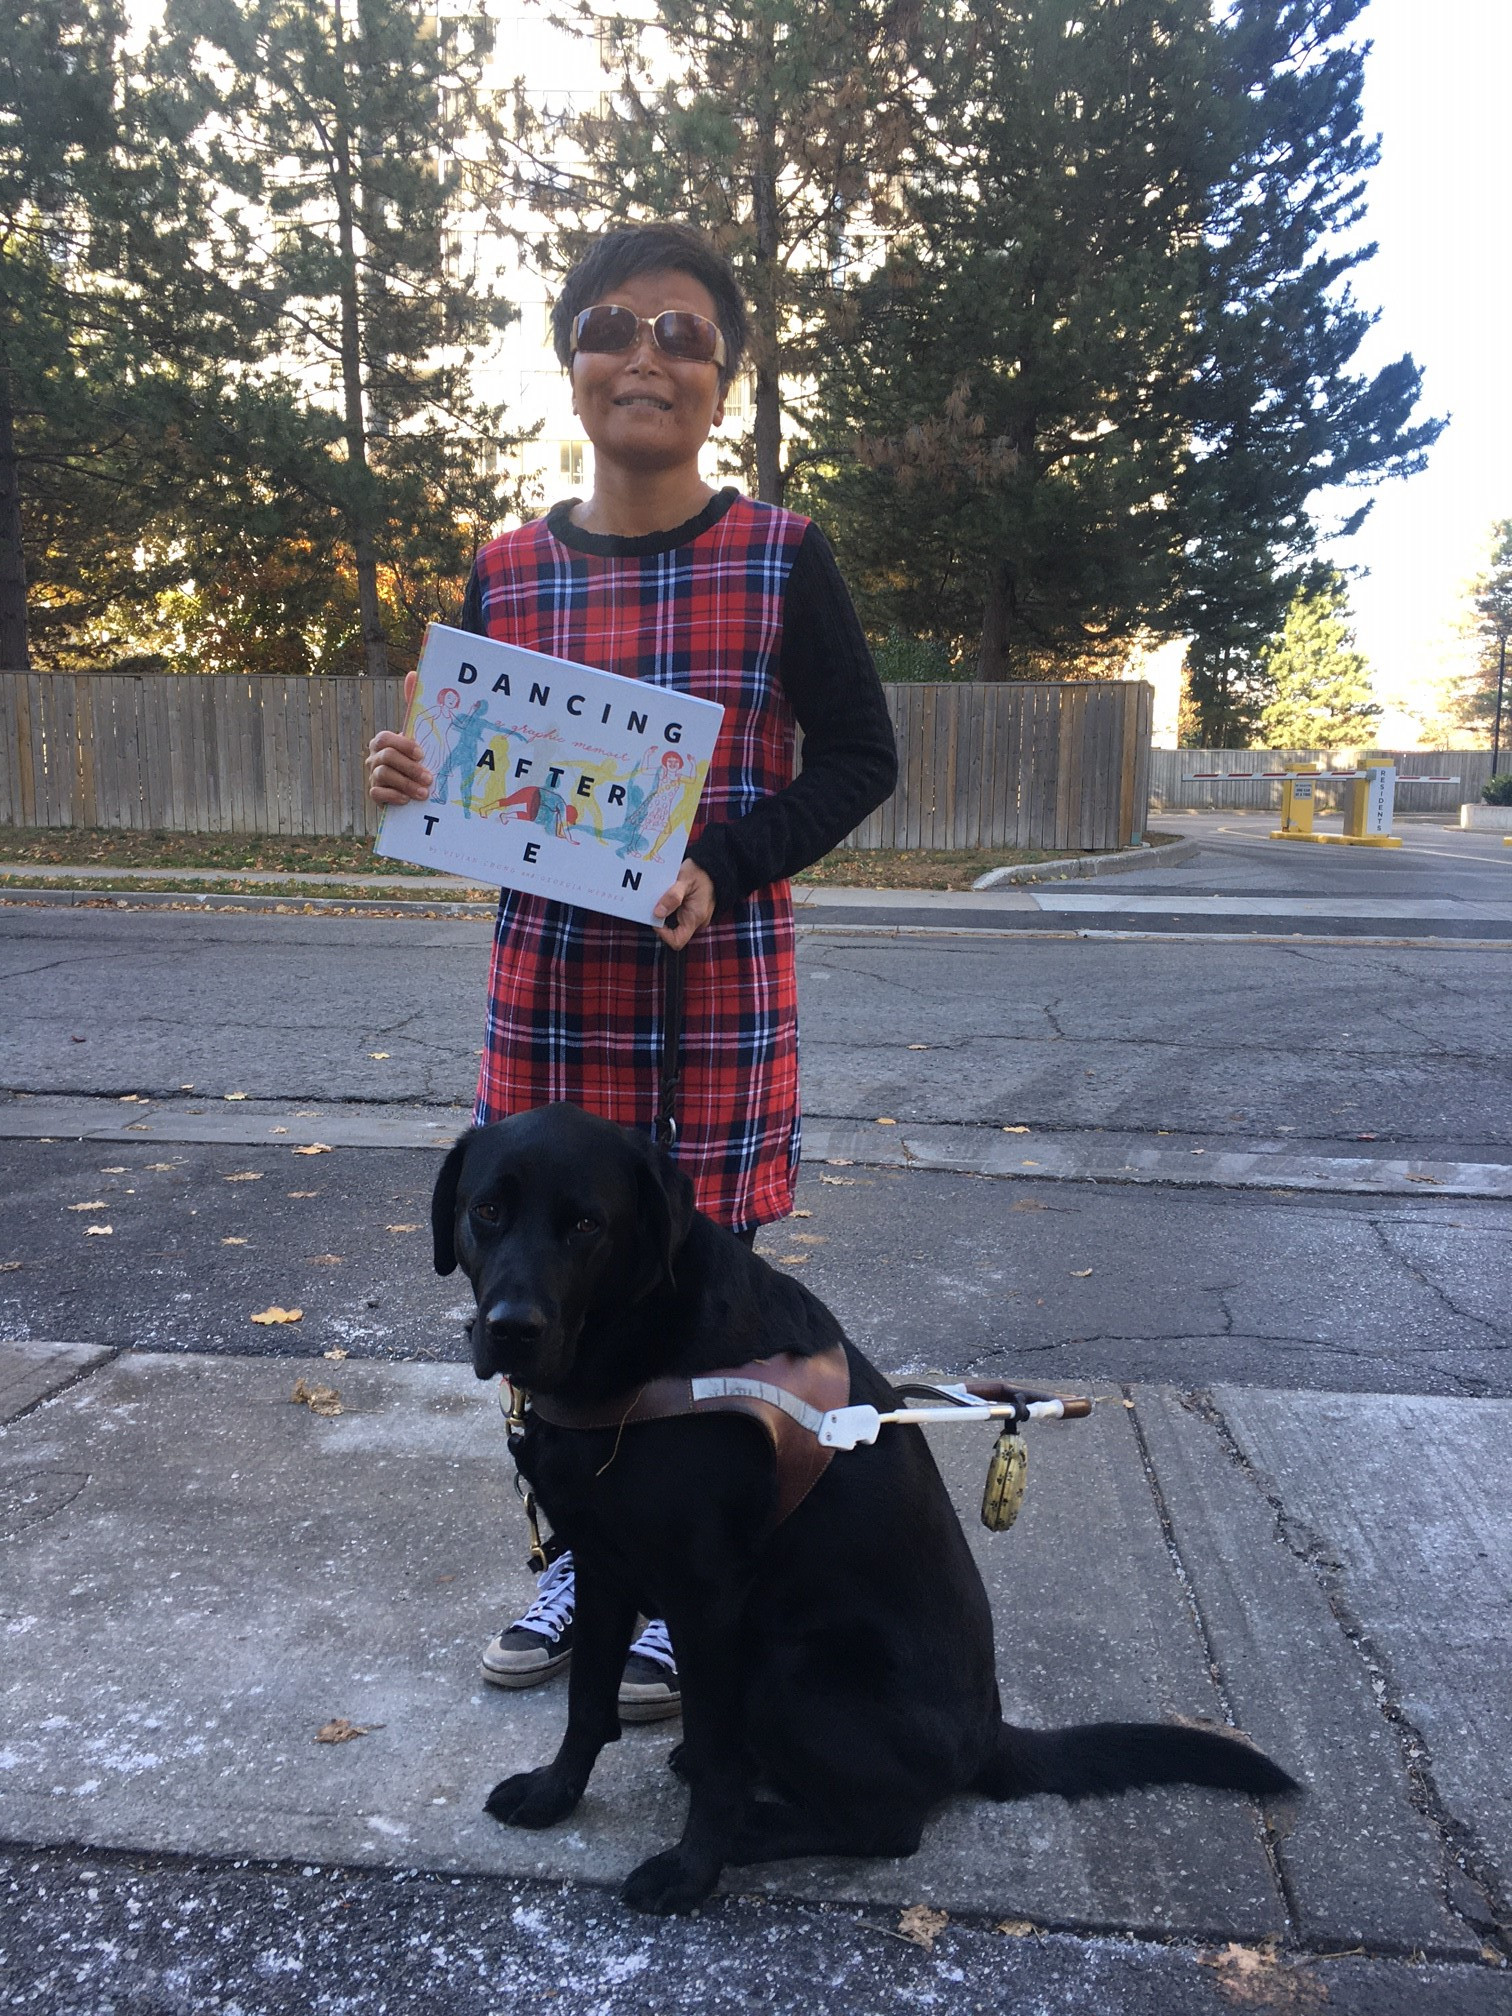 Vivian Chong stands outdoors and holds her book, Dancing after TEN. Her black guide dog, Catcher, stands at her feet. Vivian is wearing a plaid dress, sunglasses, and a big smile. 